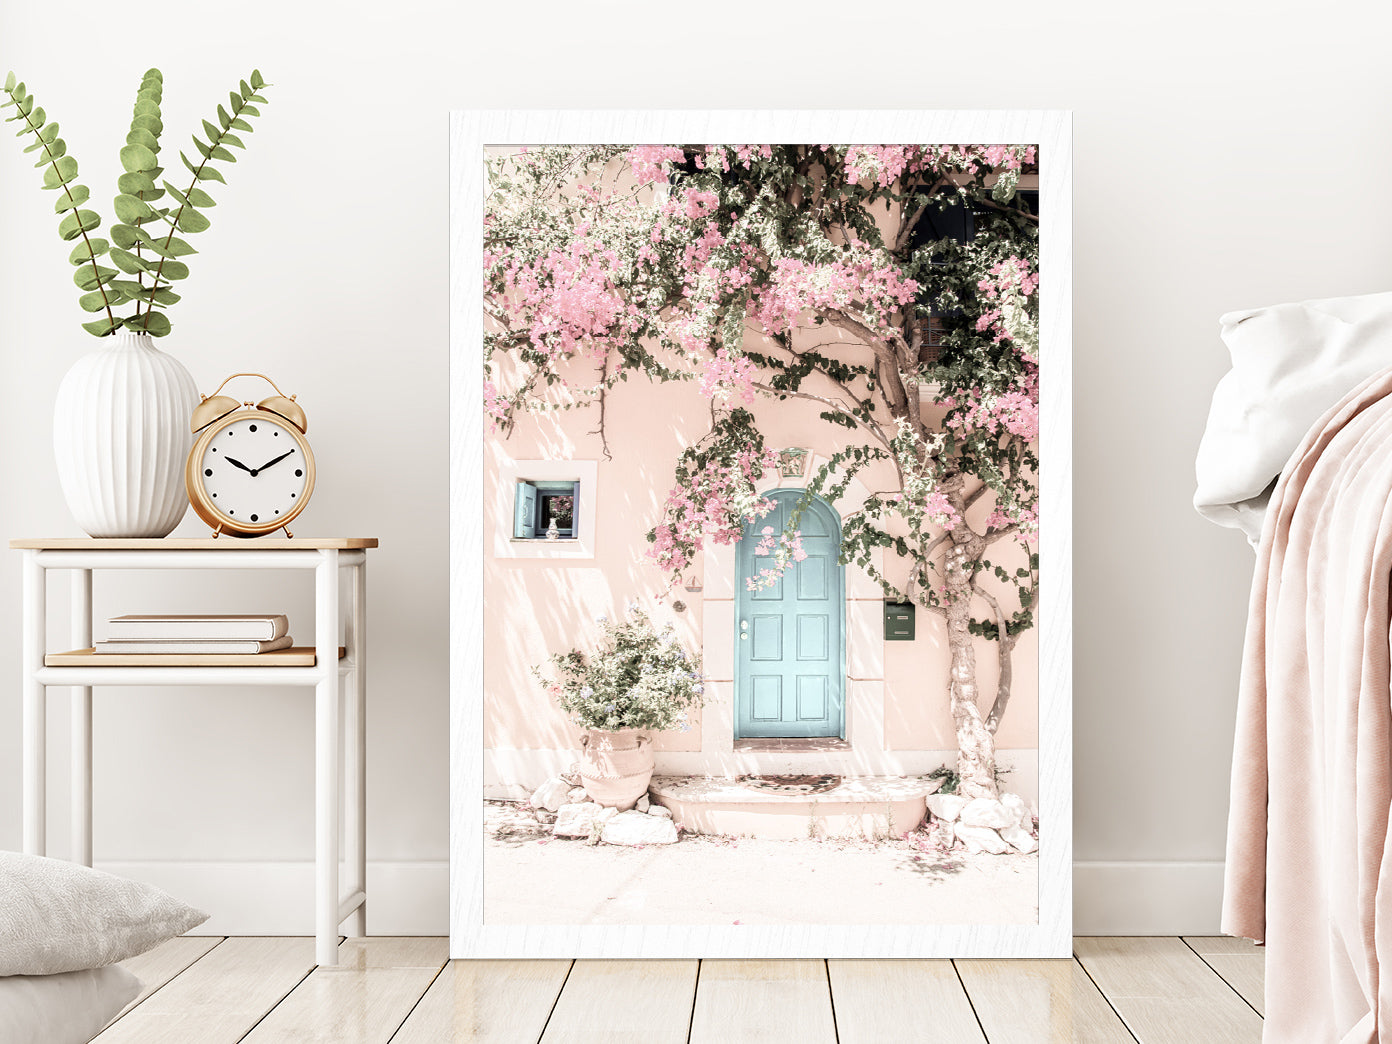 House & Flower Tree Faded Photograph Glass Framed Wall Art, Ready to Hang Quality Print Without White Border White